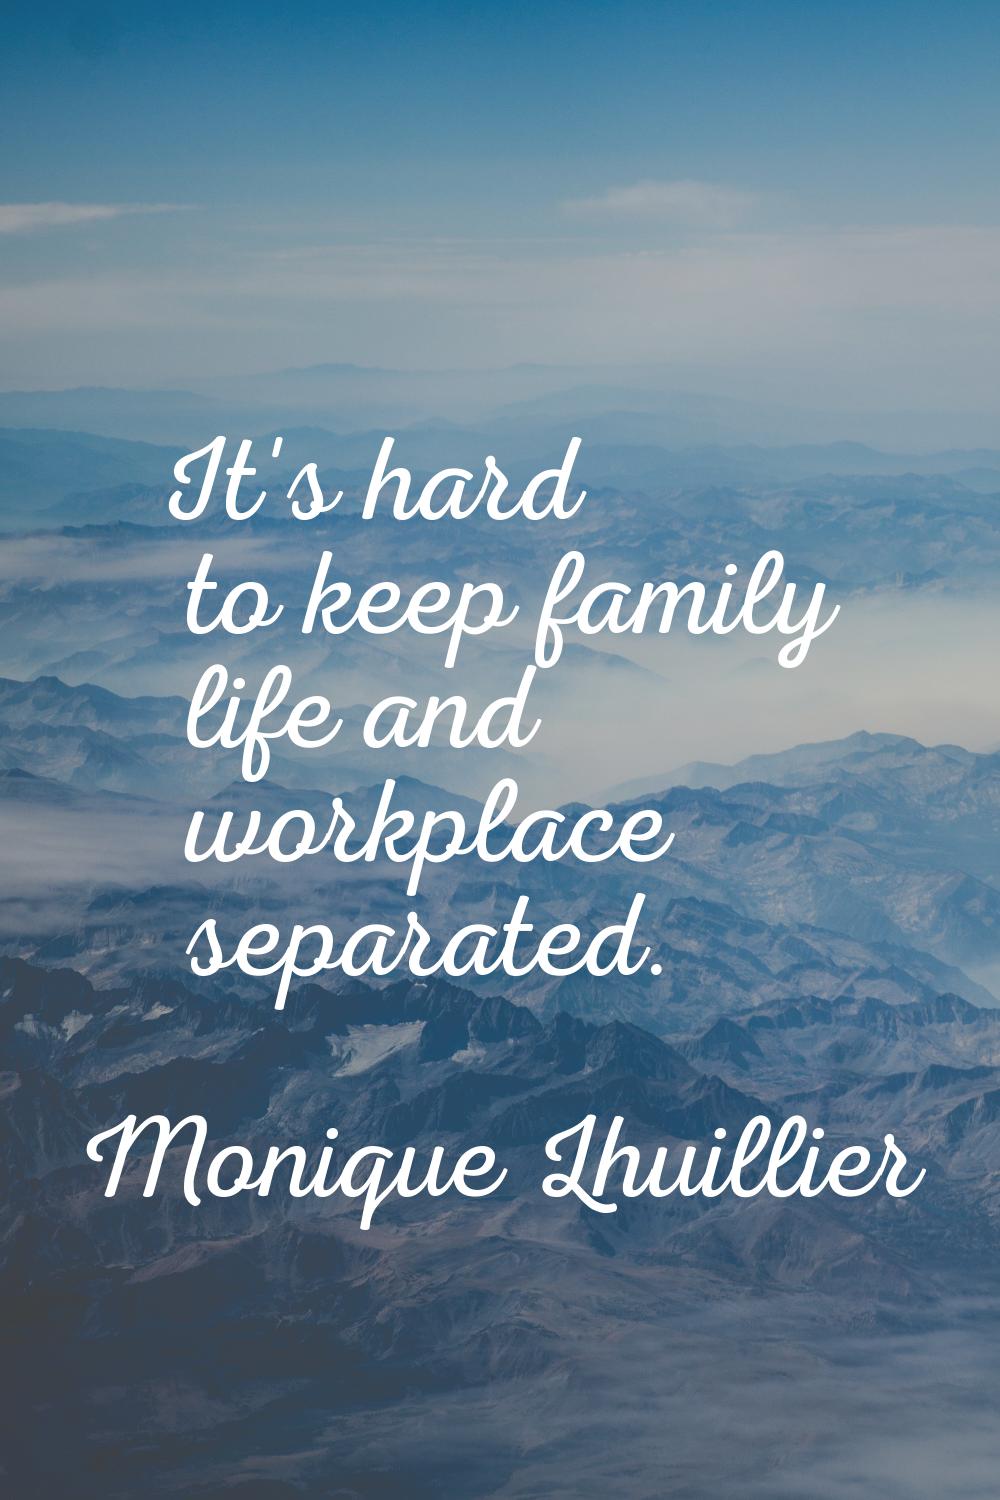 It's hard to keep family life and workplace separated.